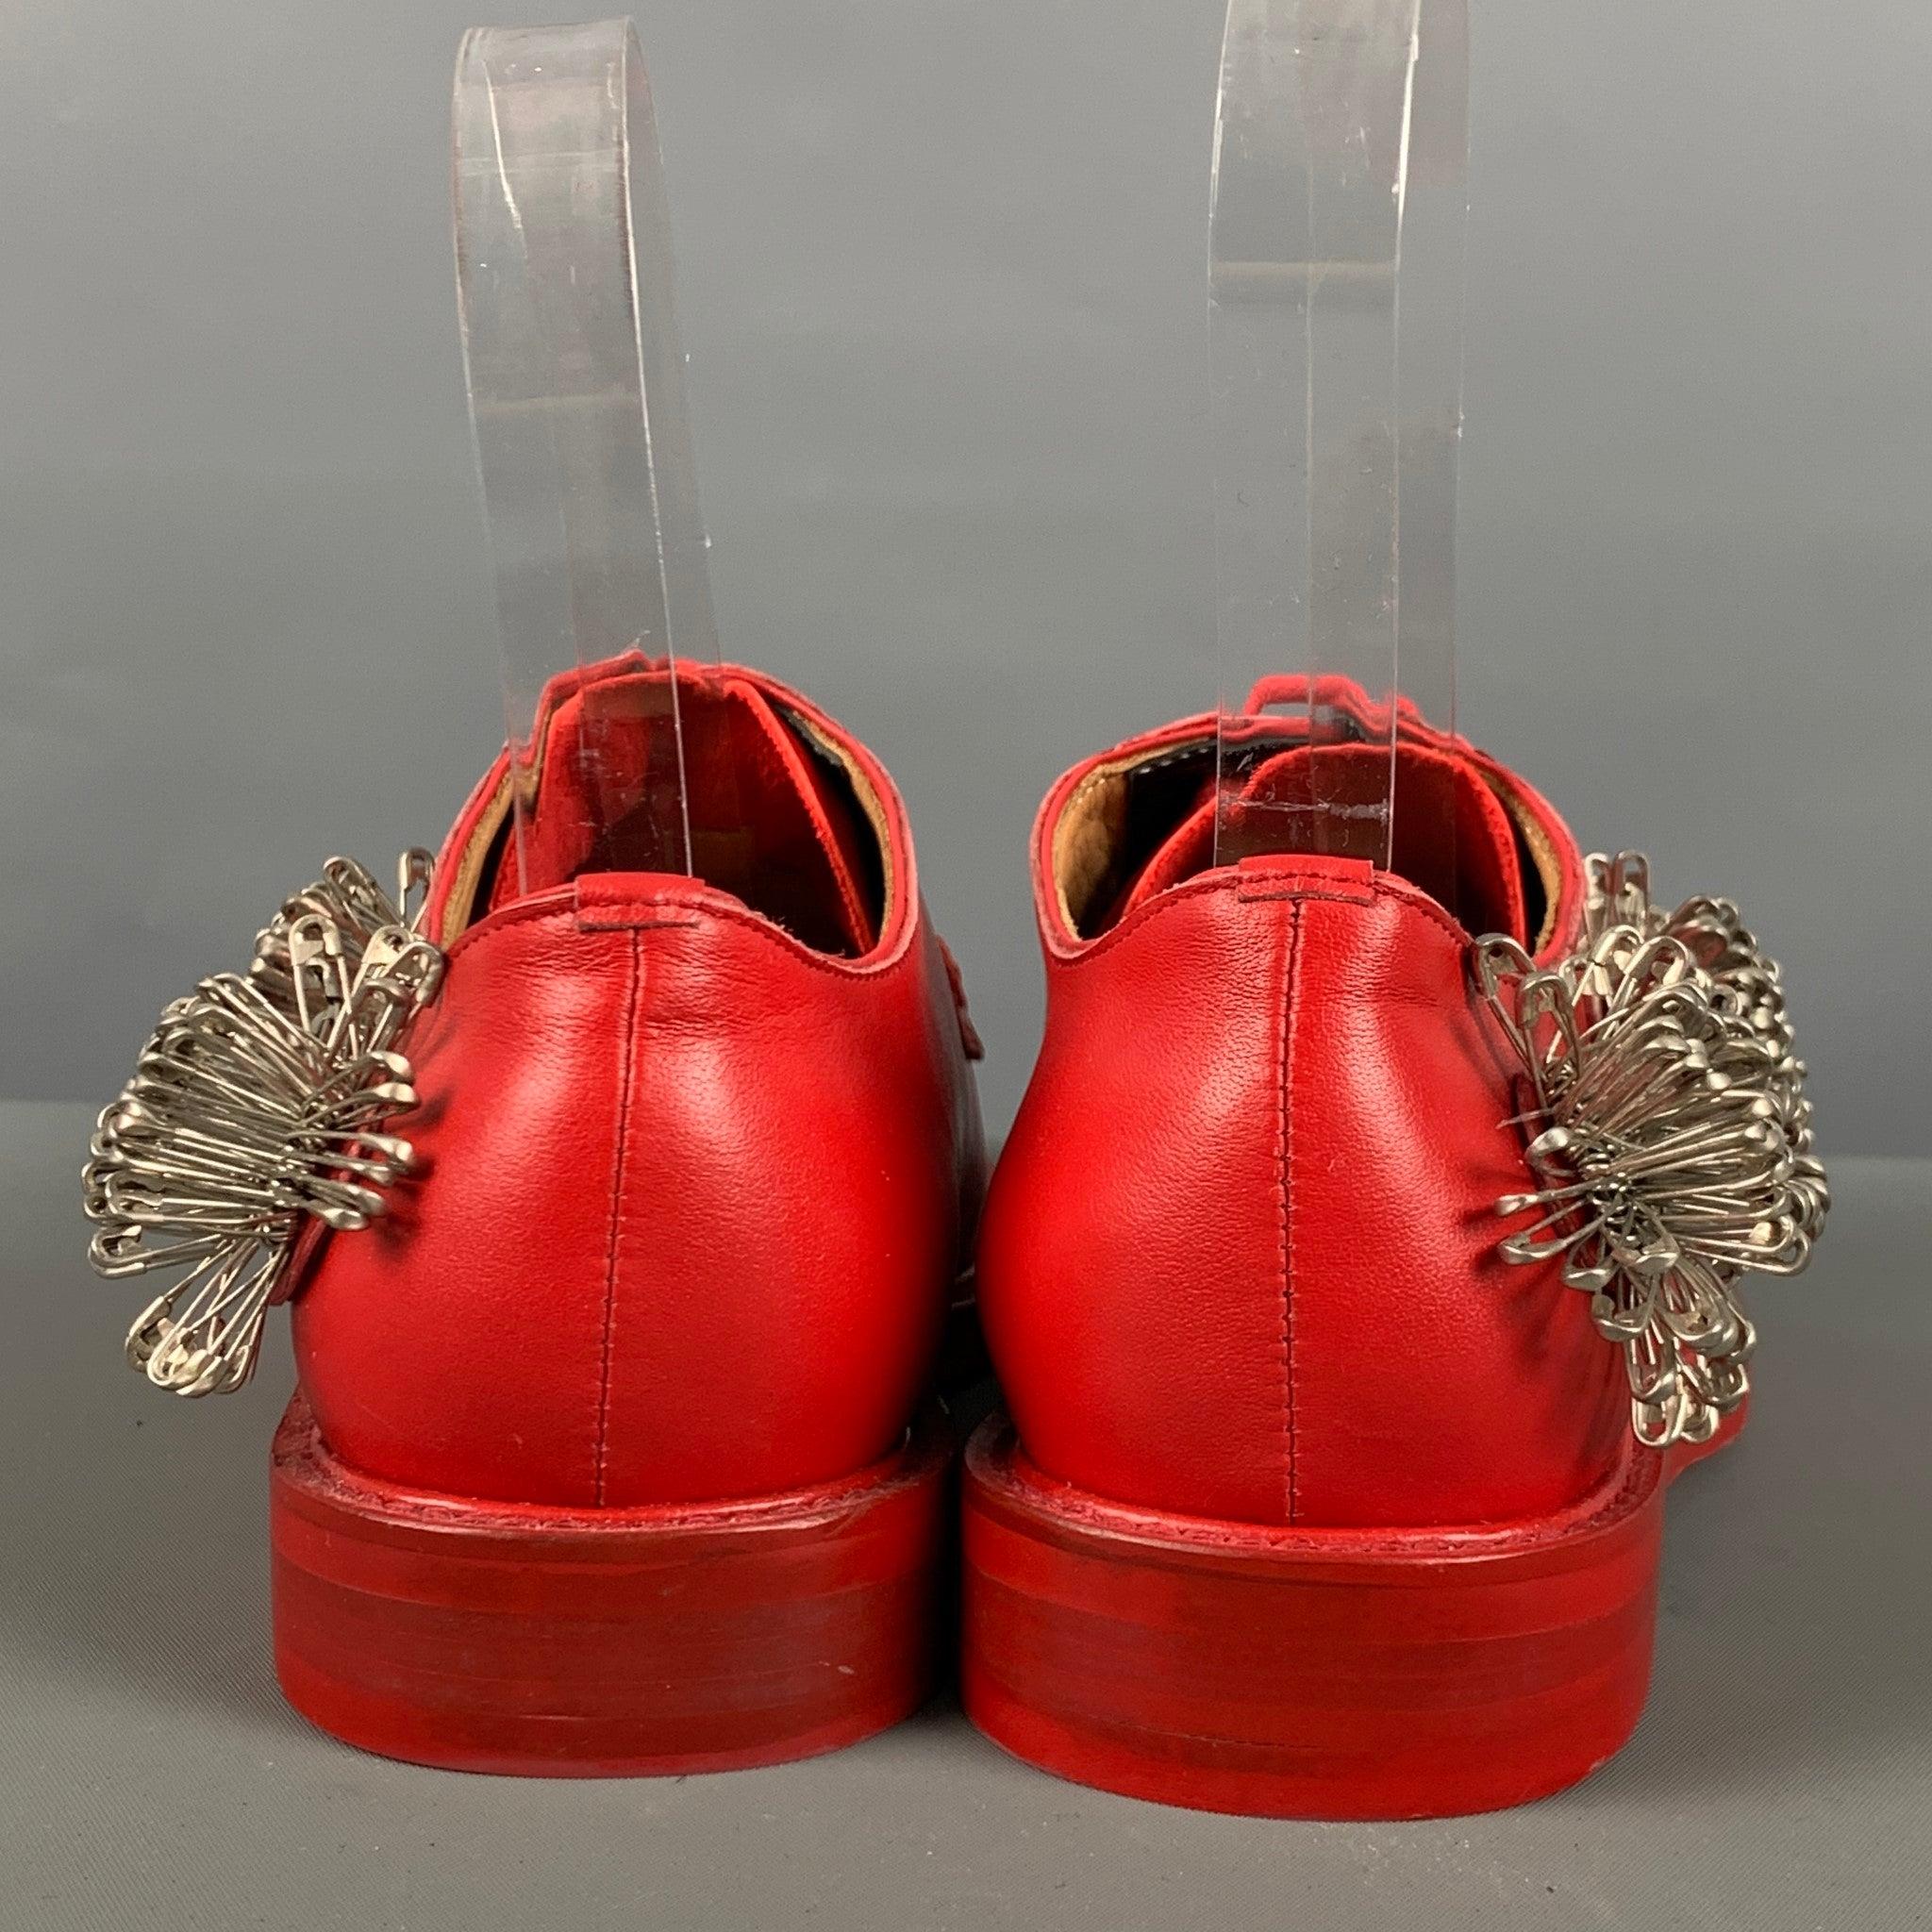 NOIR KEI NINOMIYA Size 6 Red Leather Applique Lace Up Laces In Excellent Condition For Sale In San Francisco, CA